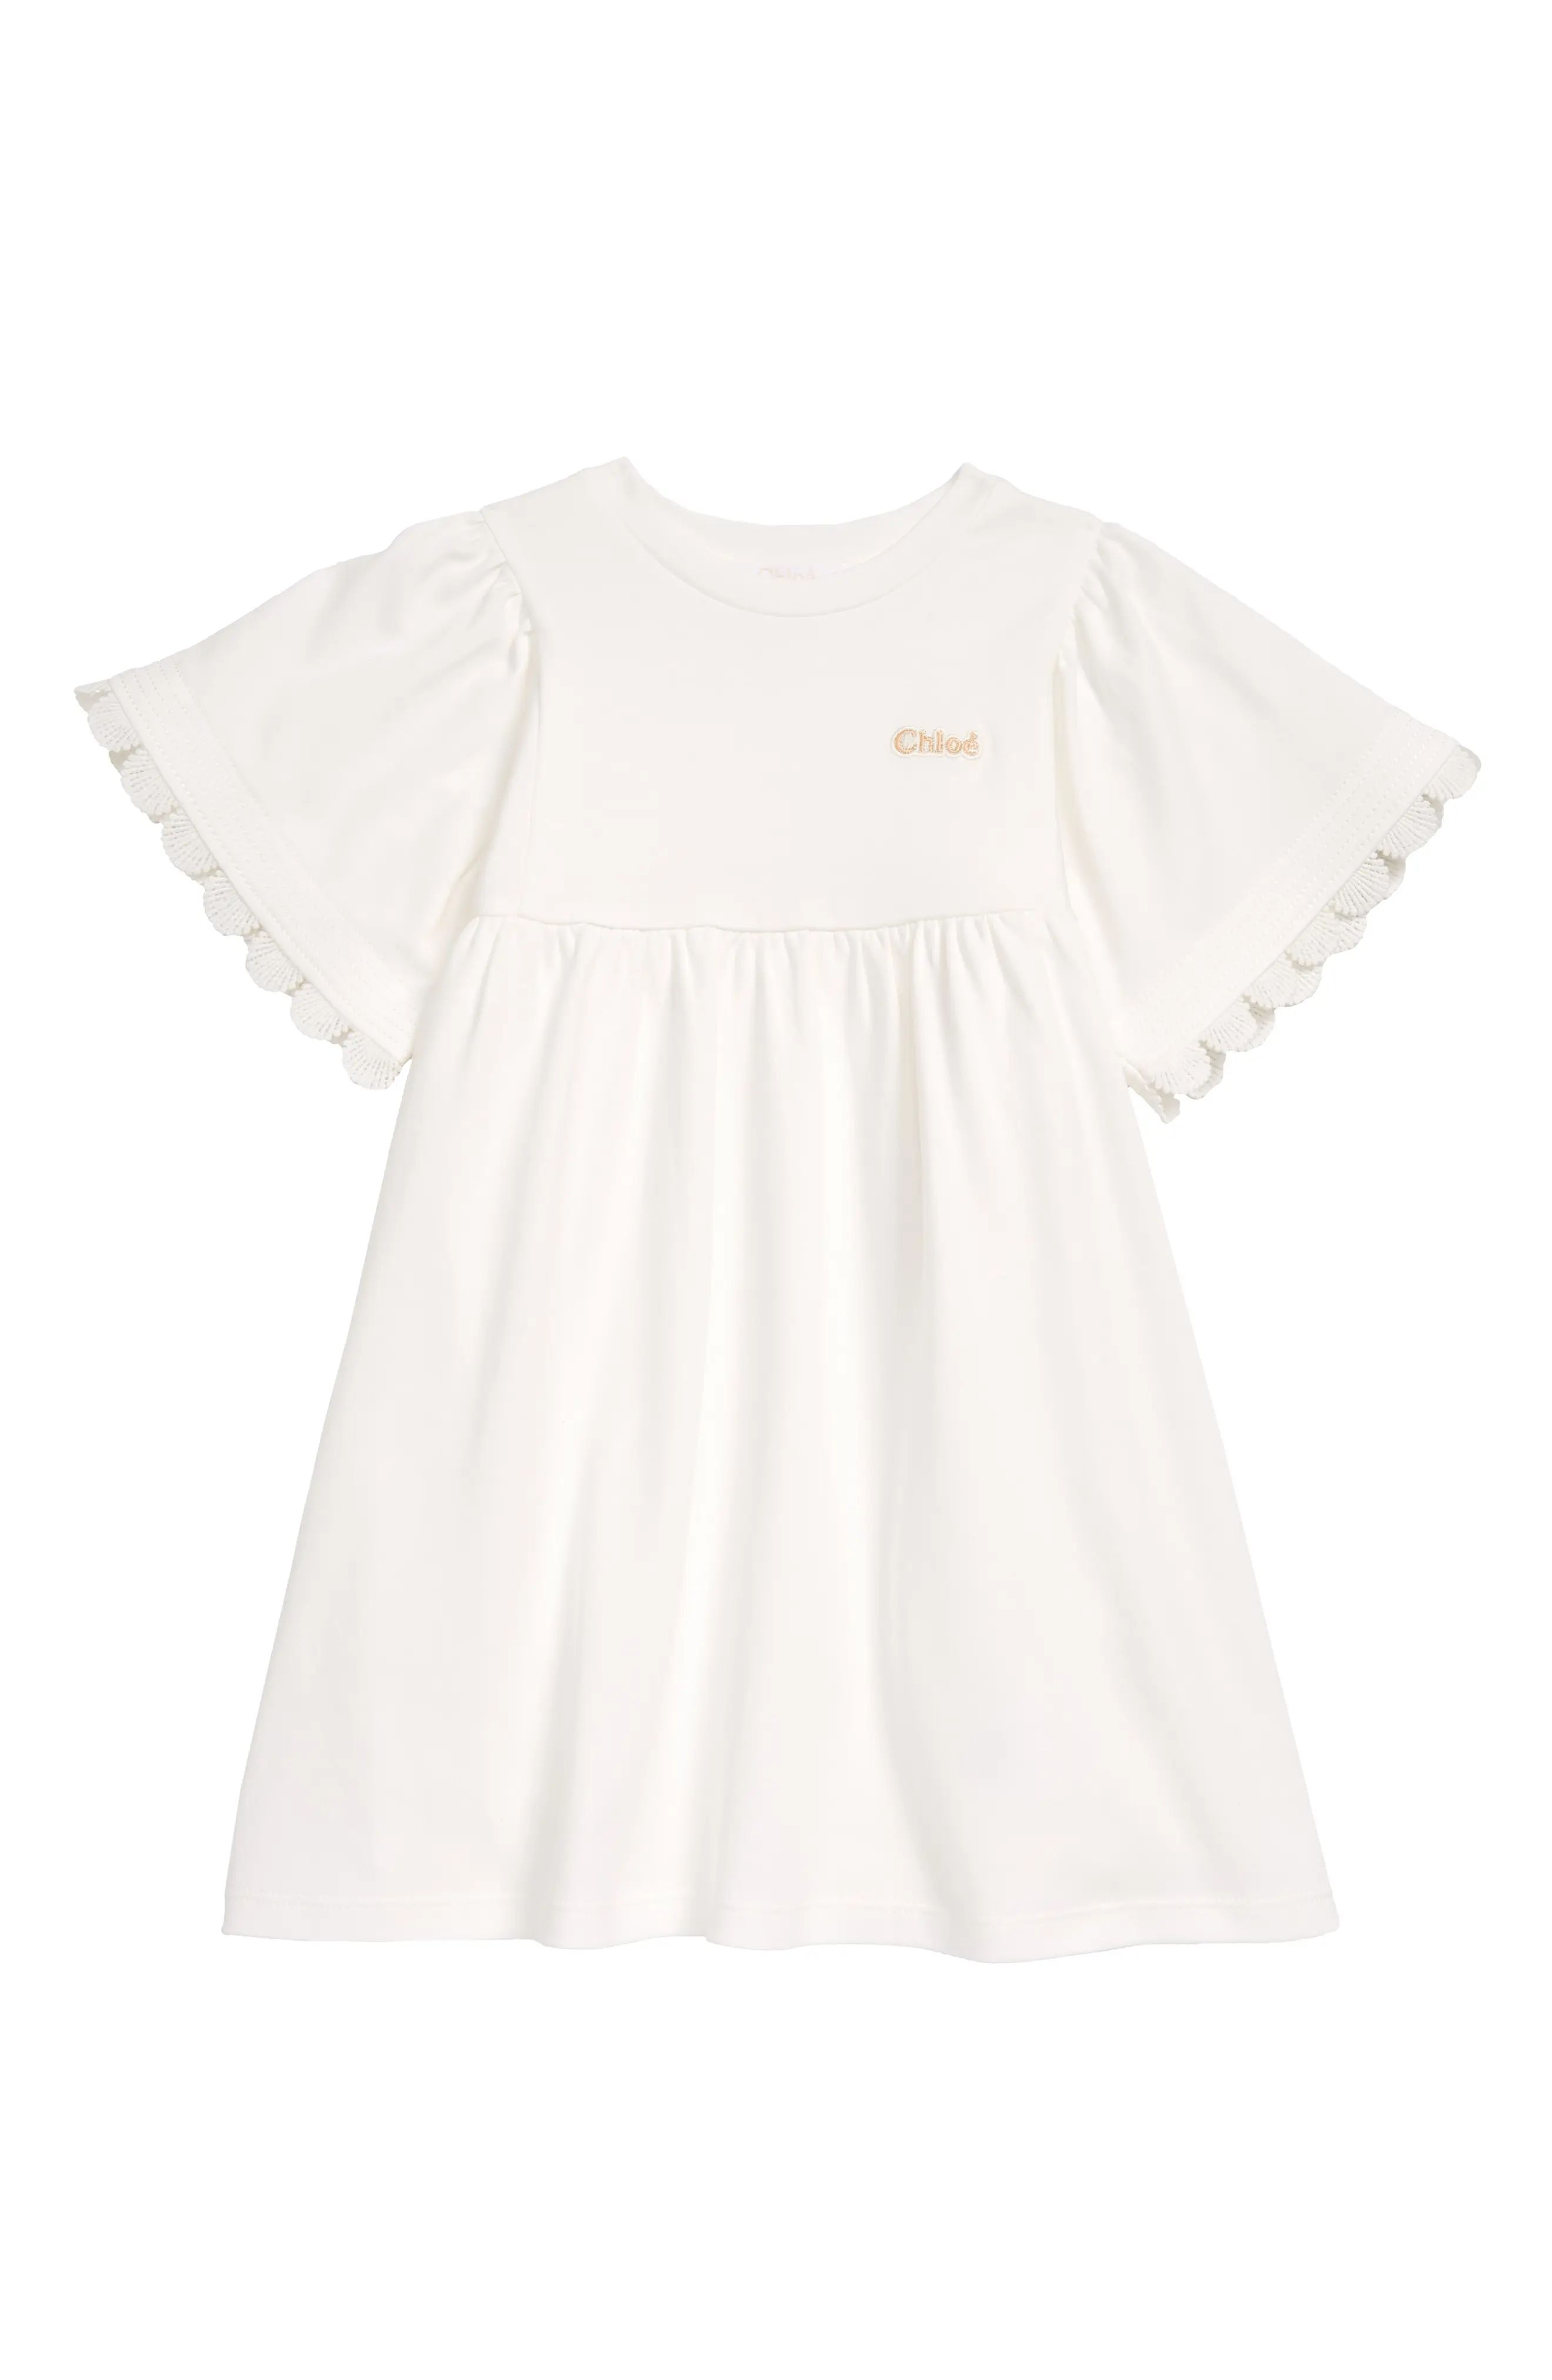 Chloe Kids' Ruffle Dress in Off White at Nordstrom, Size 8Y | Nordstrom